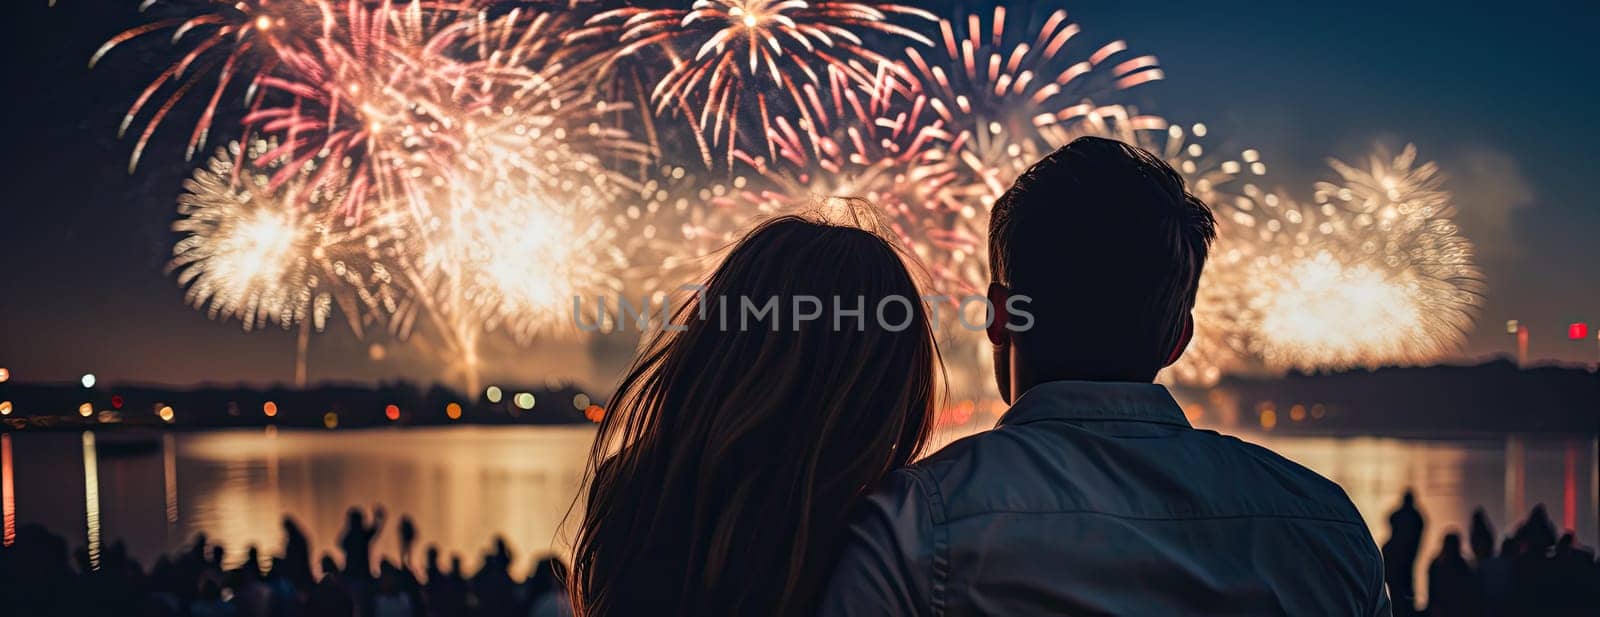 Silhouette of a couple in love looking beautiful fireworks in the night sky.